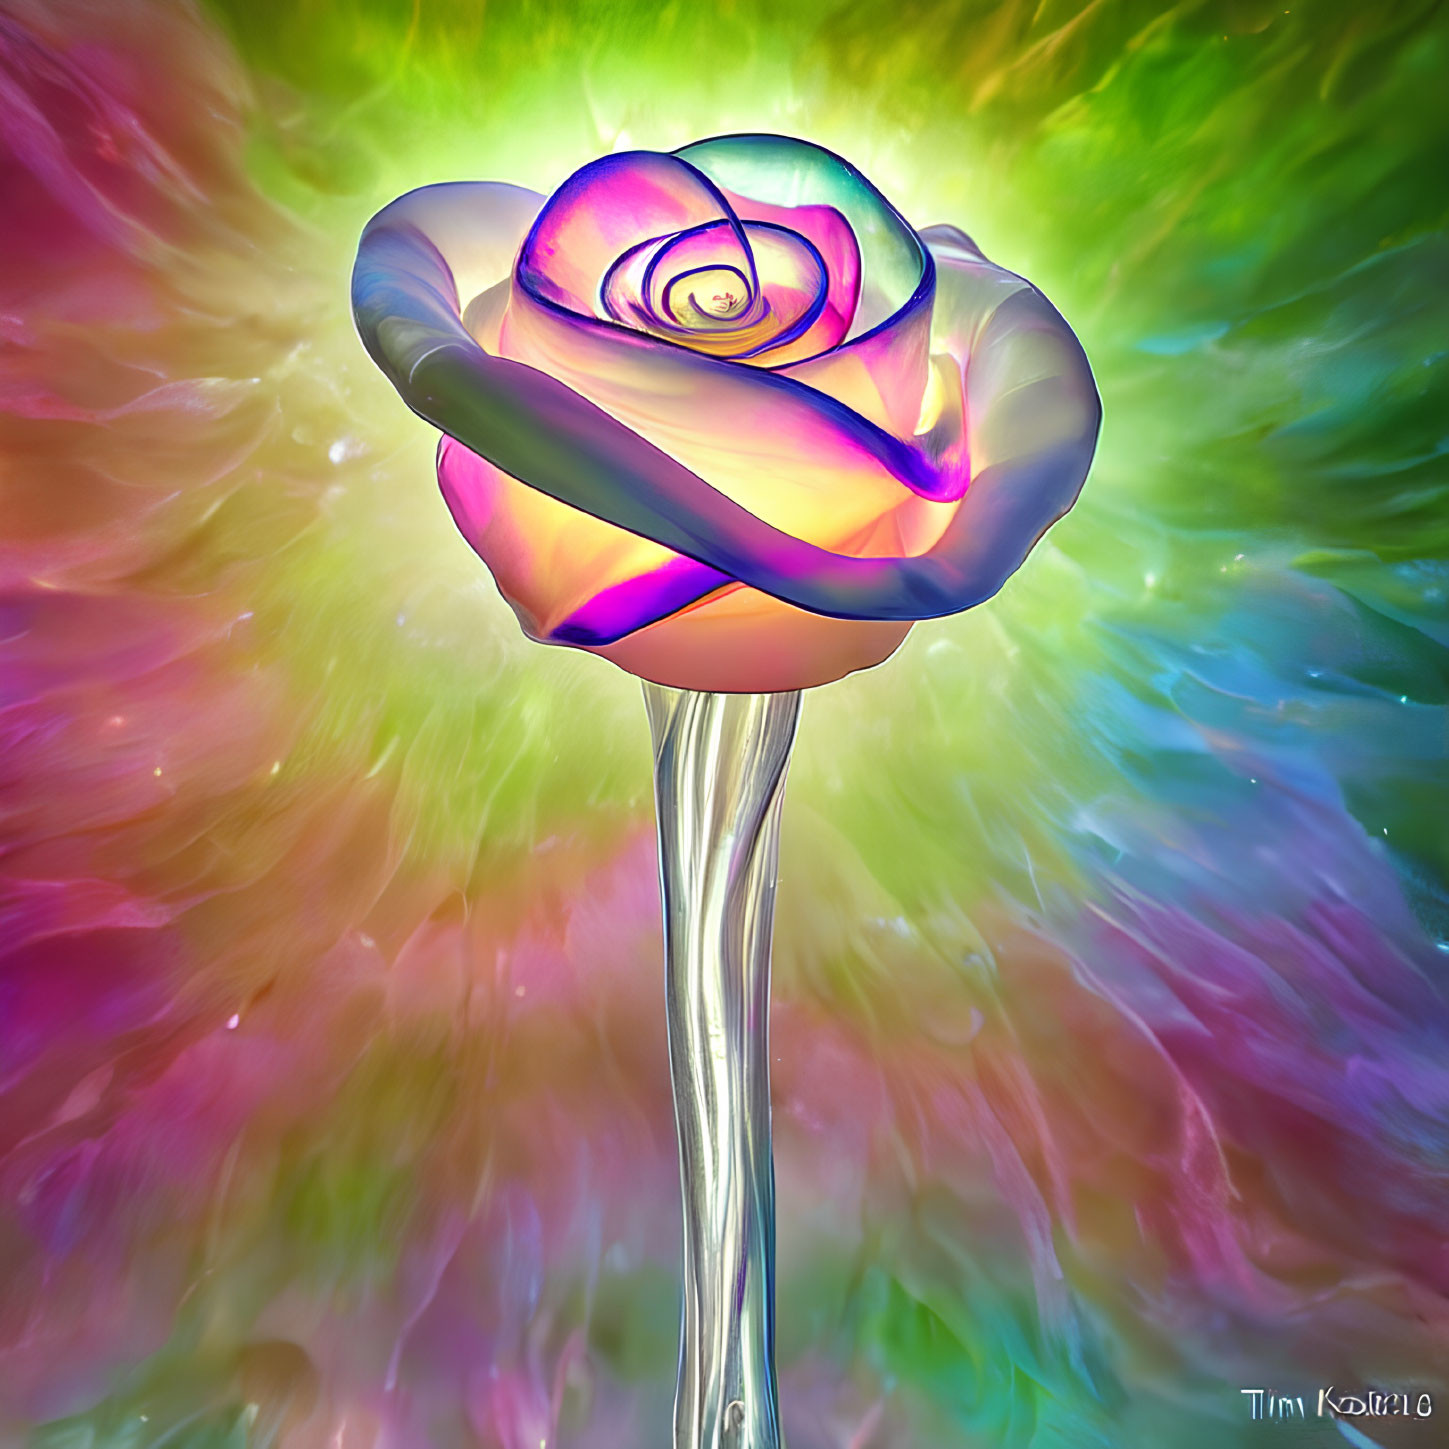 Colorful artistic representation of a rose with swirled center and metallic stem on pastel background